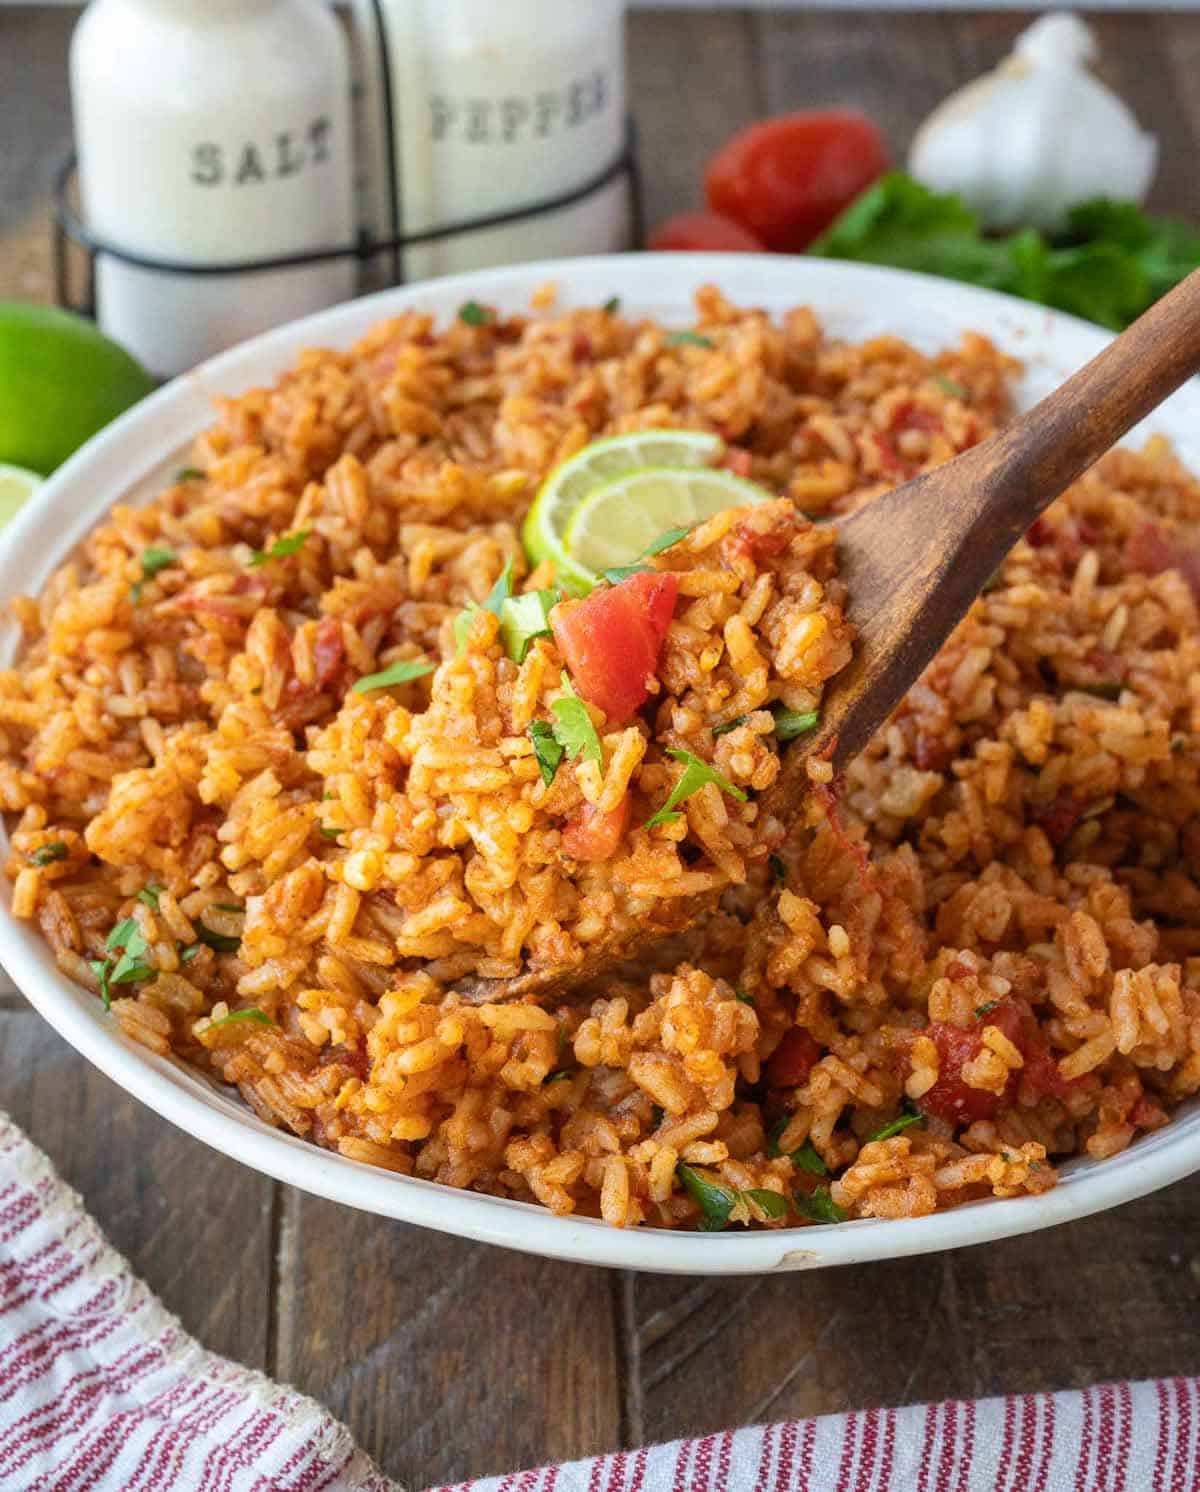 A wooden spoon scooping up some mexican rice.